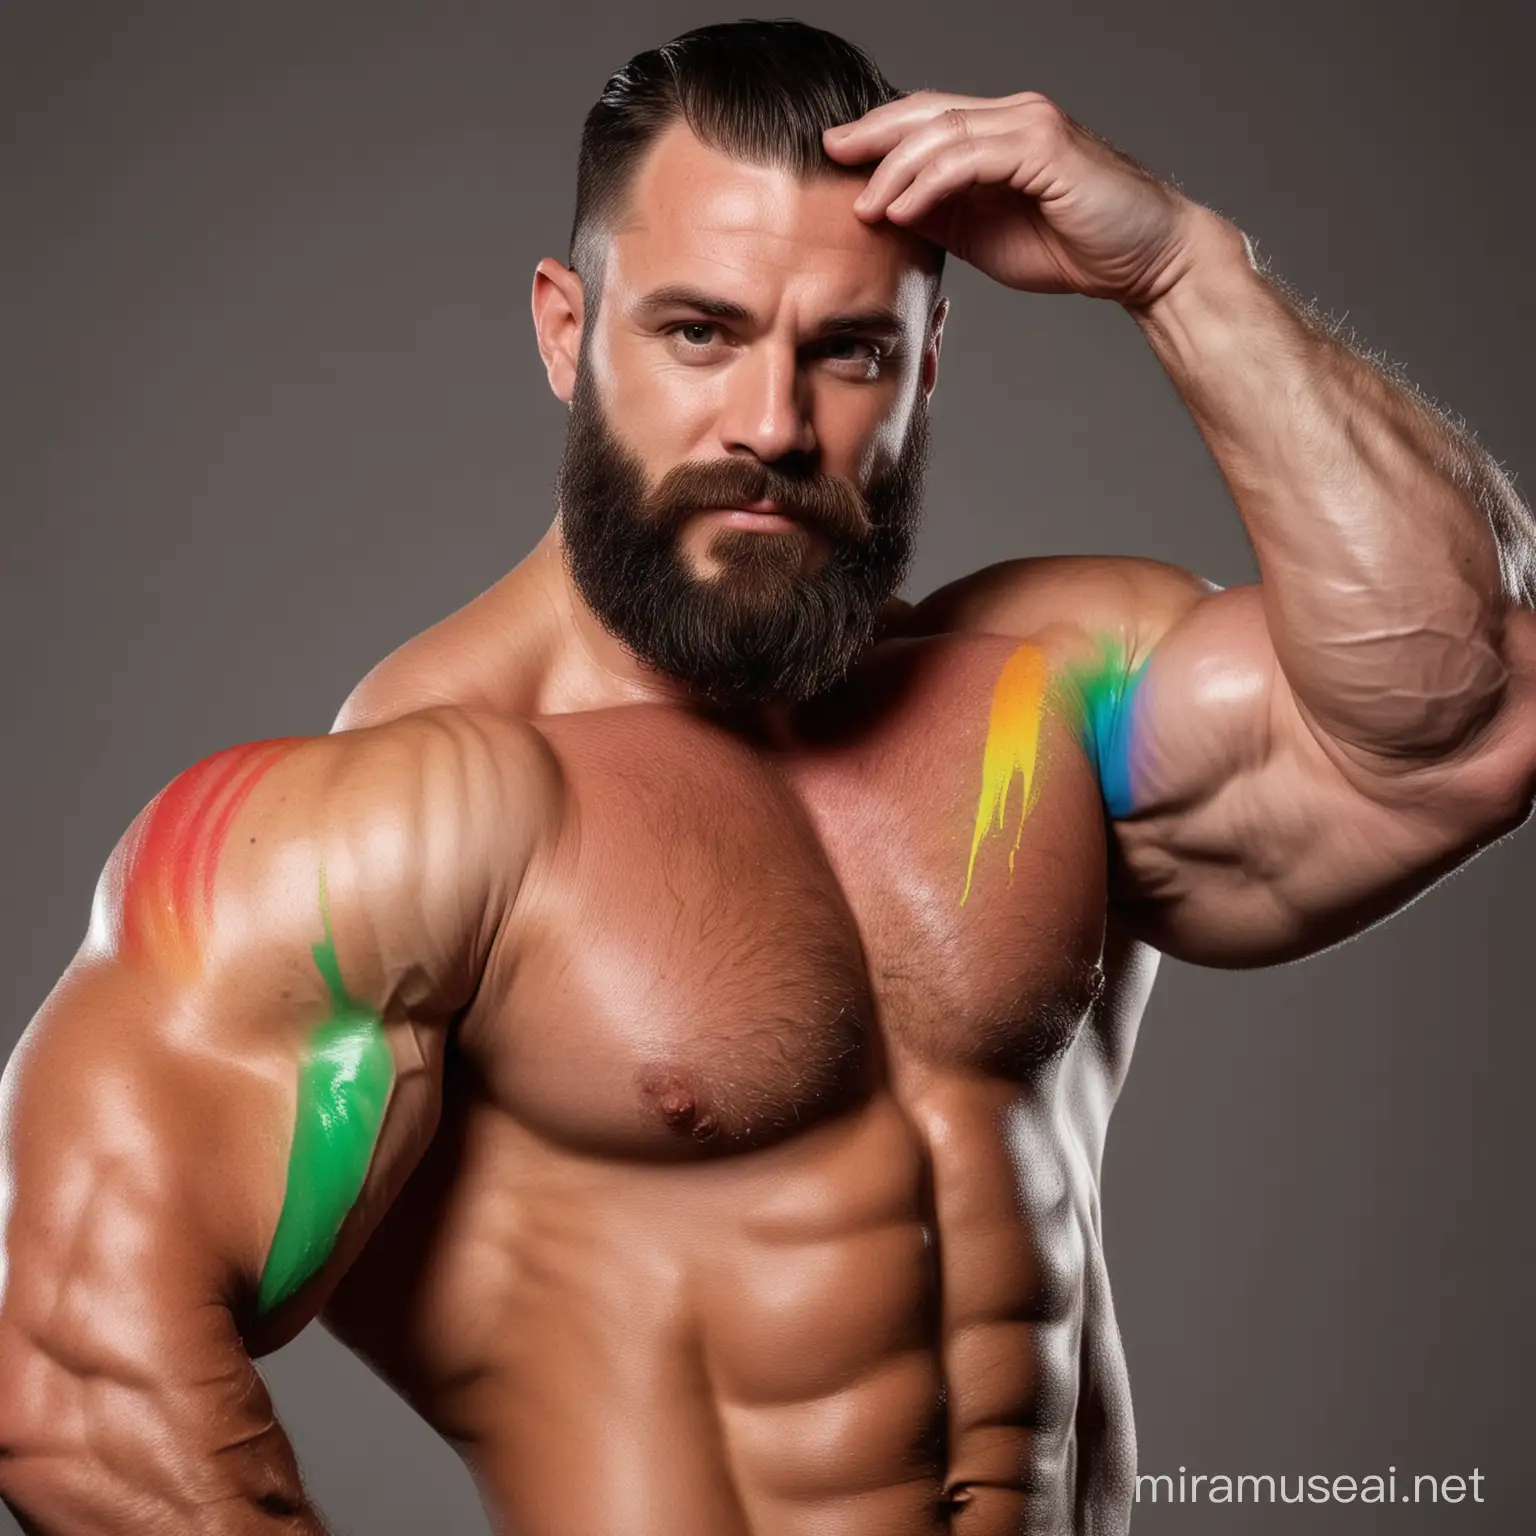 Muscular Bodybuilder Exercising with Rainbow Colored Painted Weights